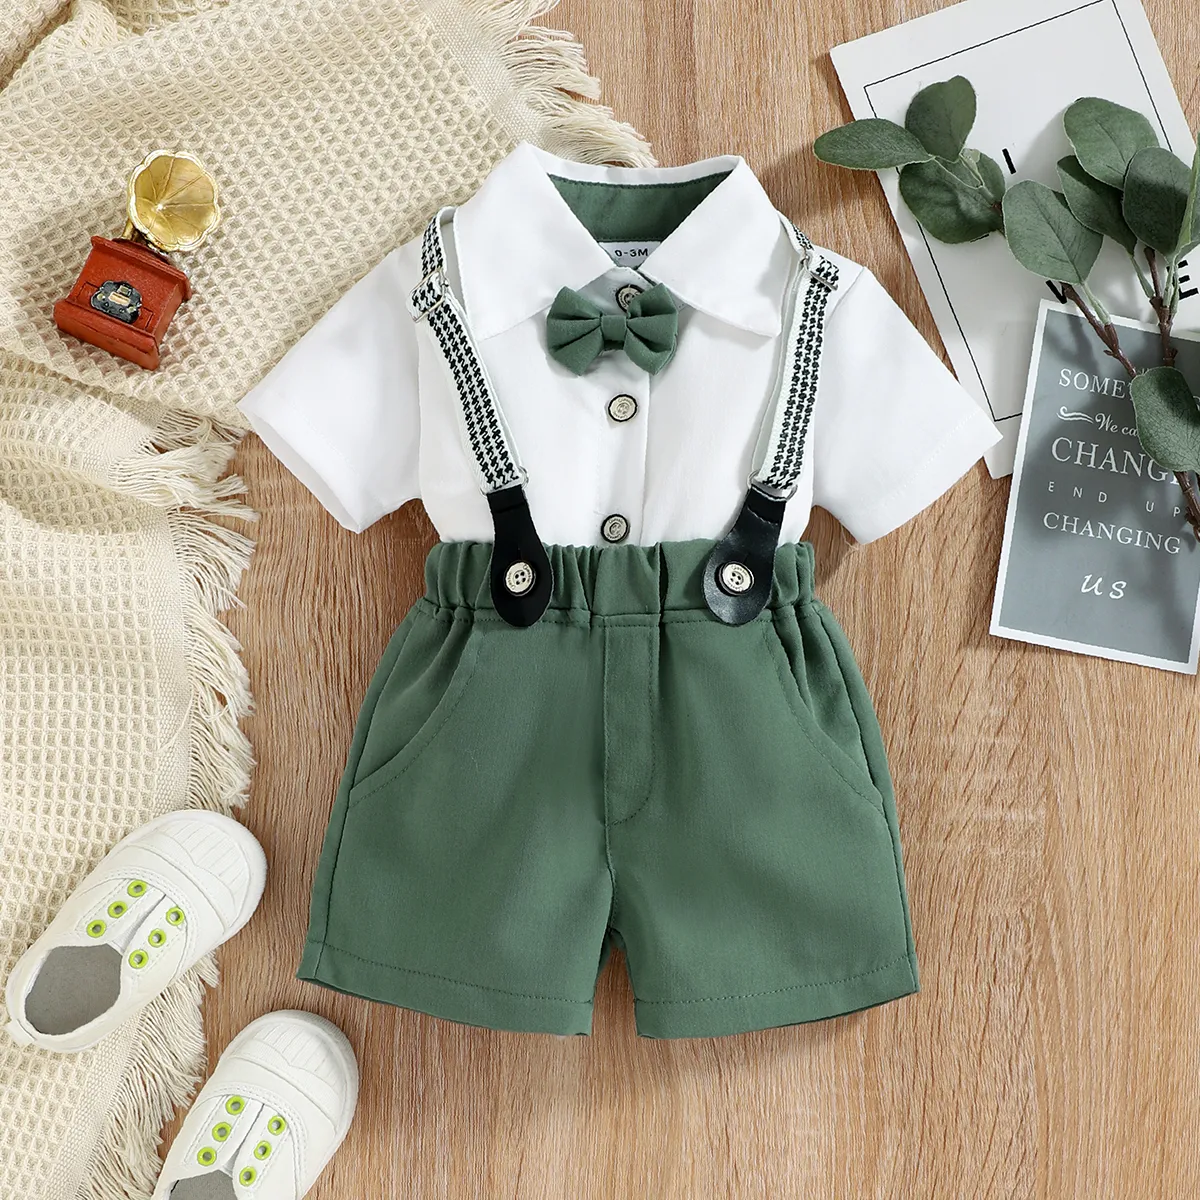 Baby Boy Short-sleeve Party Outfit Gentle Bow Tie Shirt and Suspender Shorts Set  big image 1